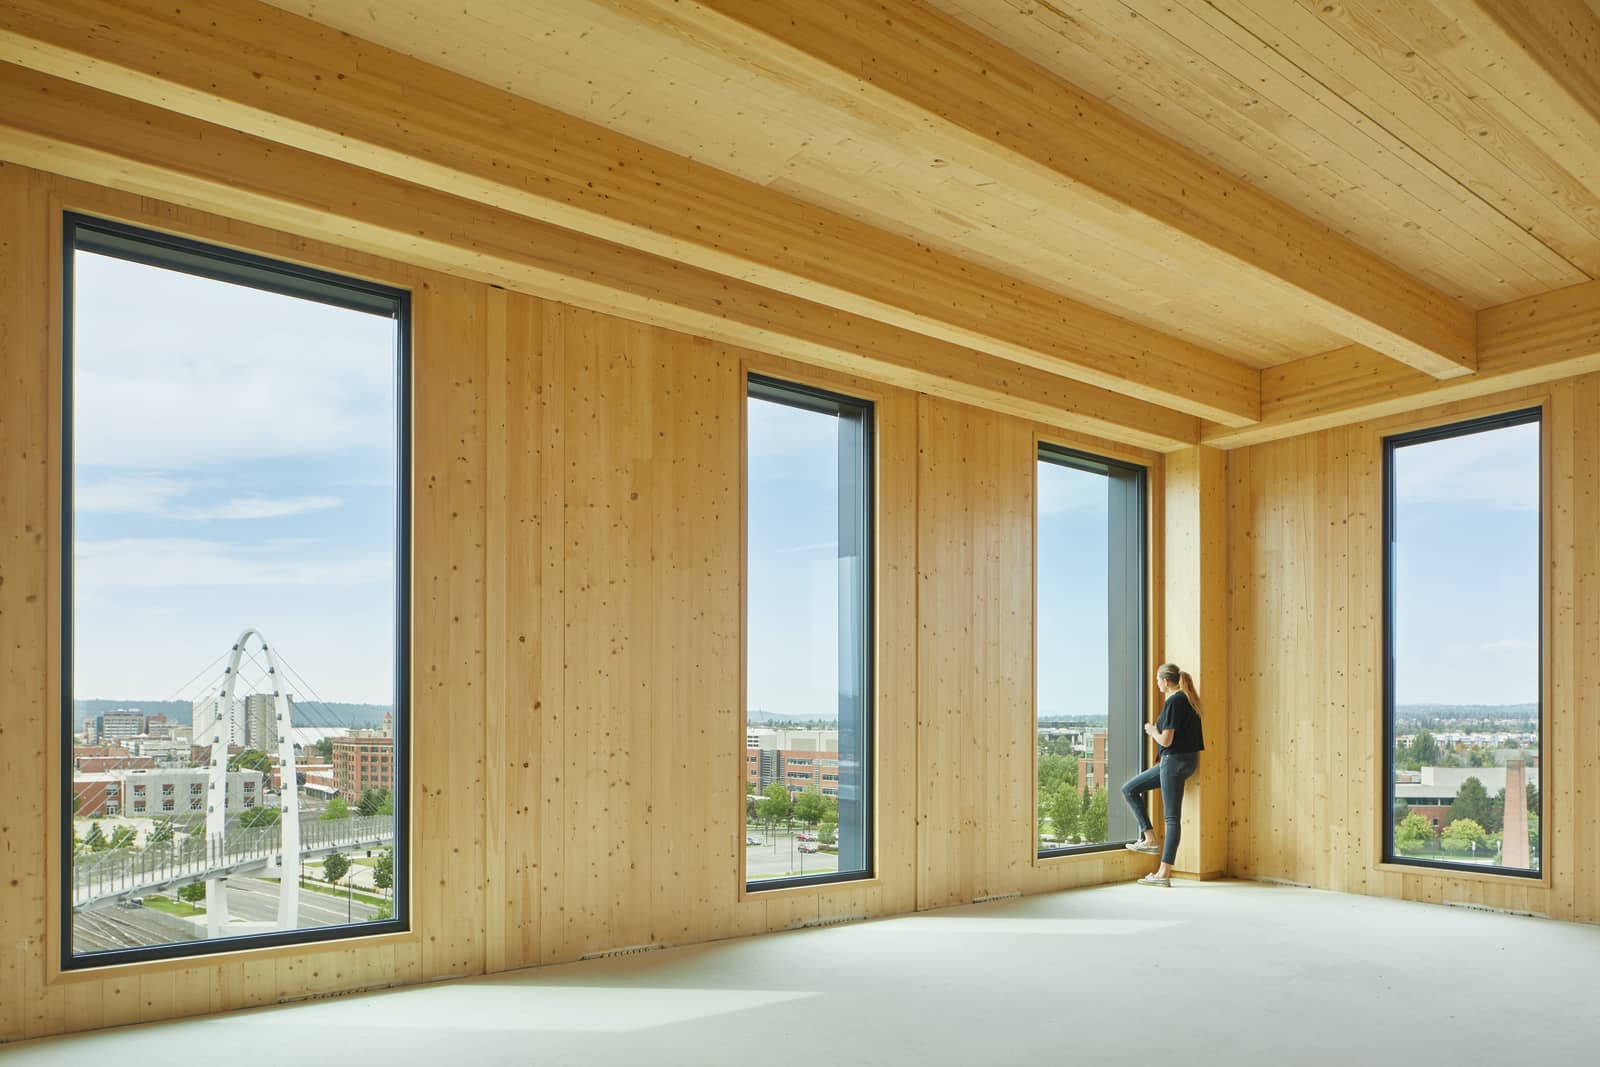 Creating Beautiful Spaces with Cross-Laminated Timber